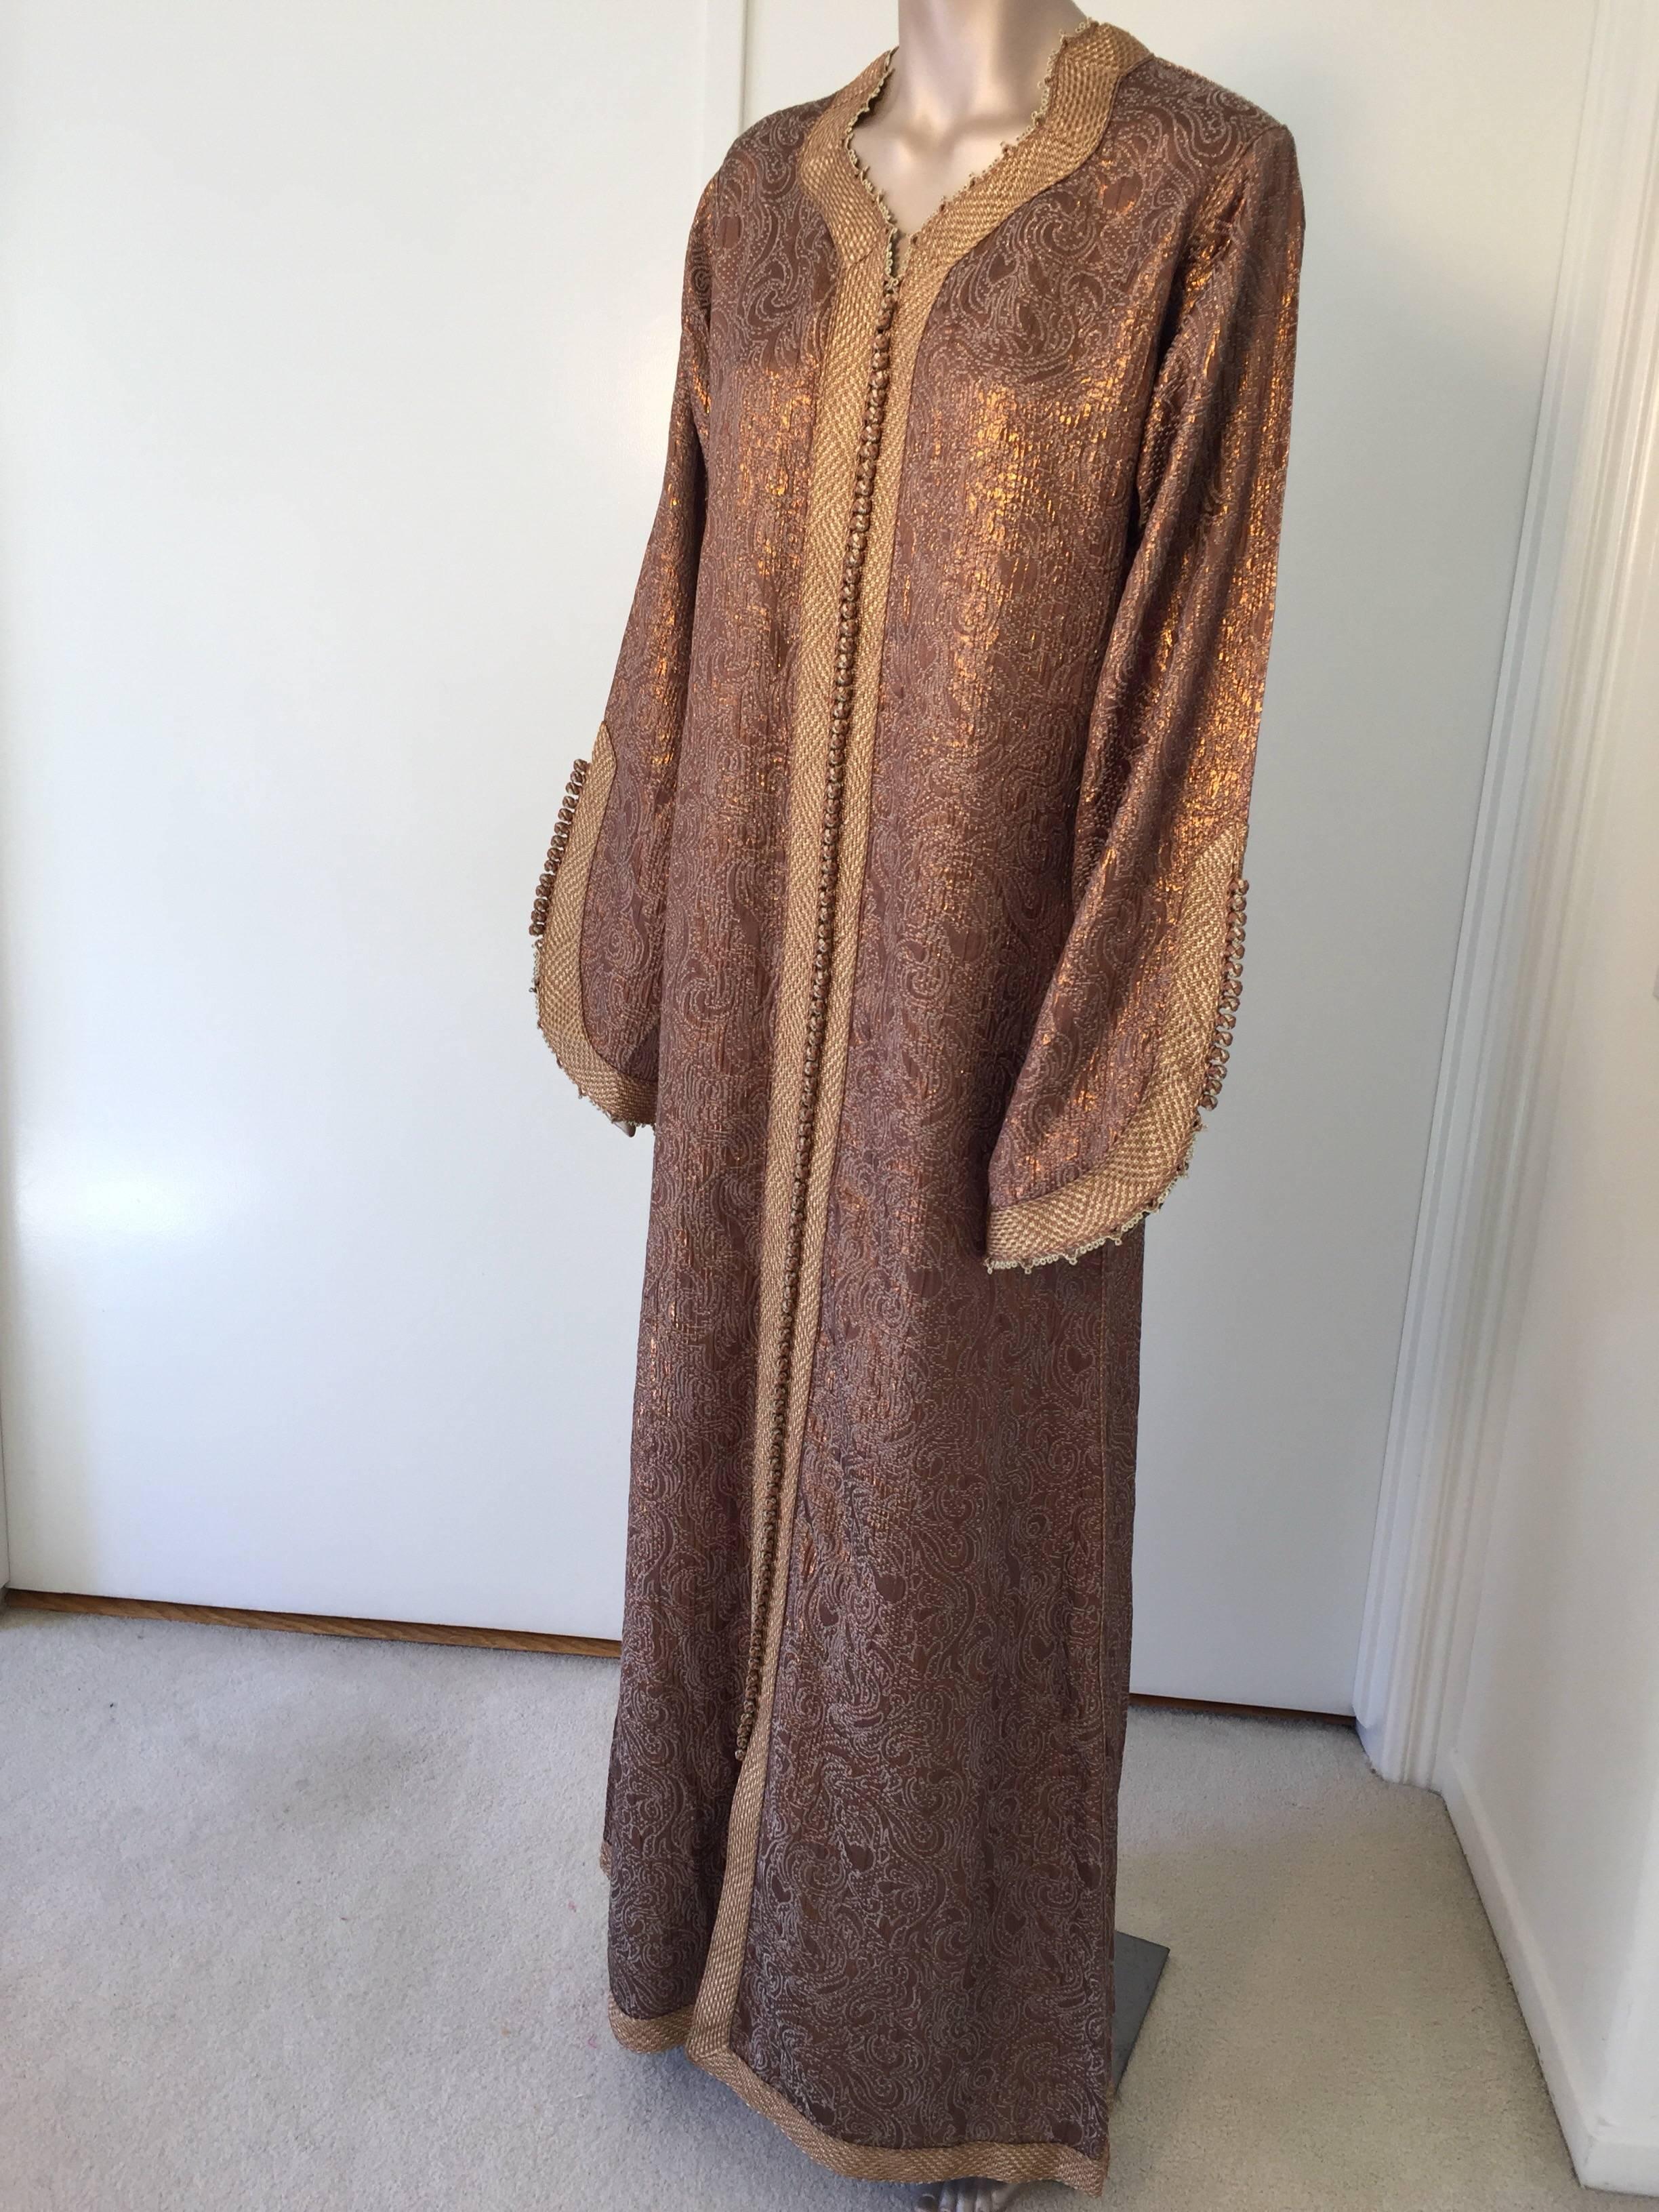 Moroccan caftan, evening or interior bronze gold metallic floral brocade dress kaftan with gold trim.
Hand-made vintage exotic 1970s metallic bronze brocade caftan gown, ceremonial caftan from North Africa, Morocco.
The luminous bronze and gold